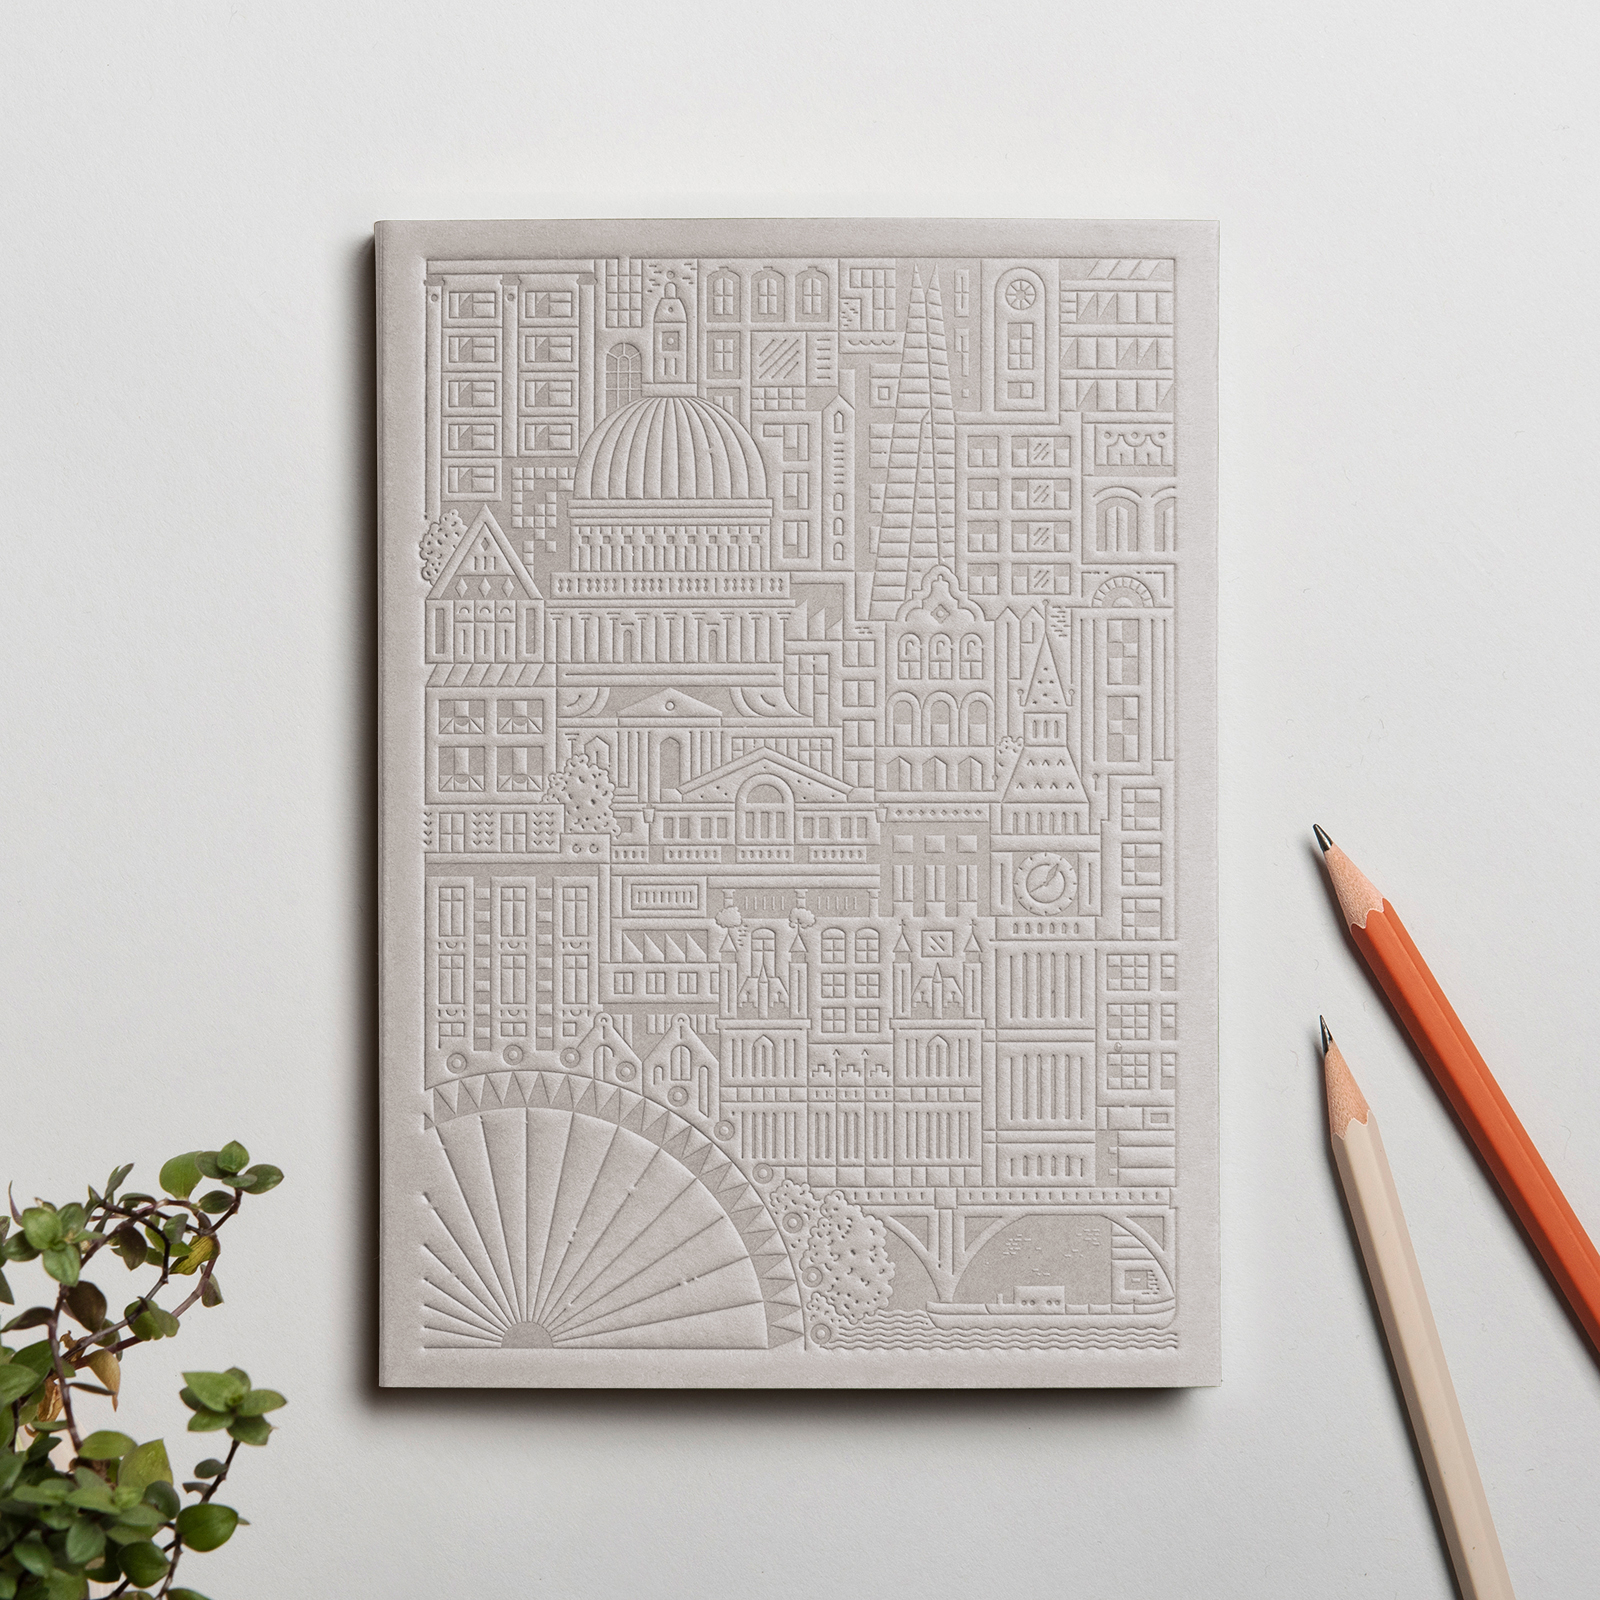 London Notebook in Concrete by The City Works